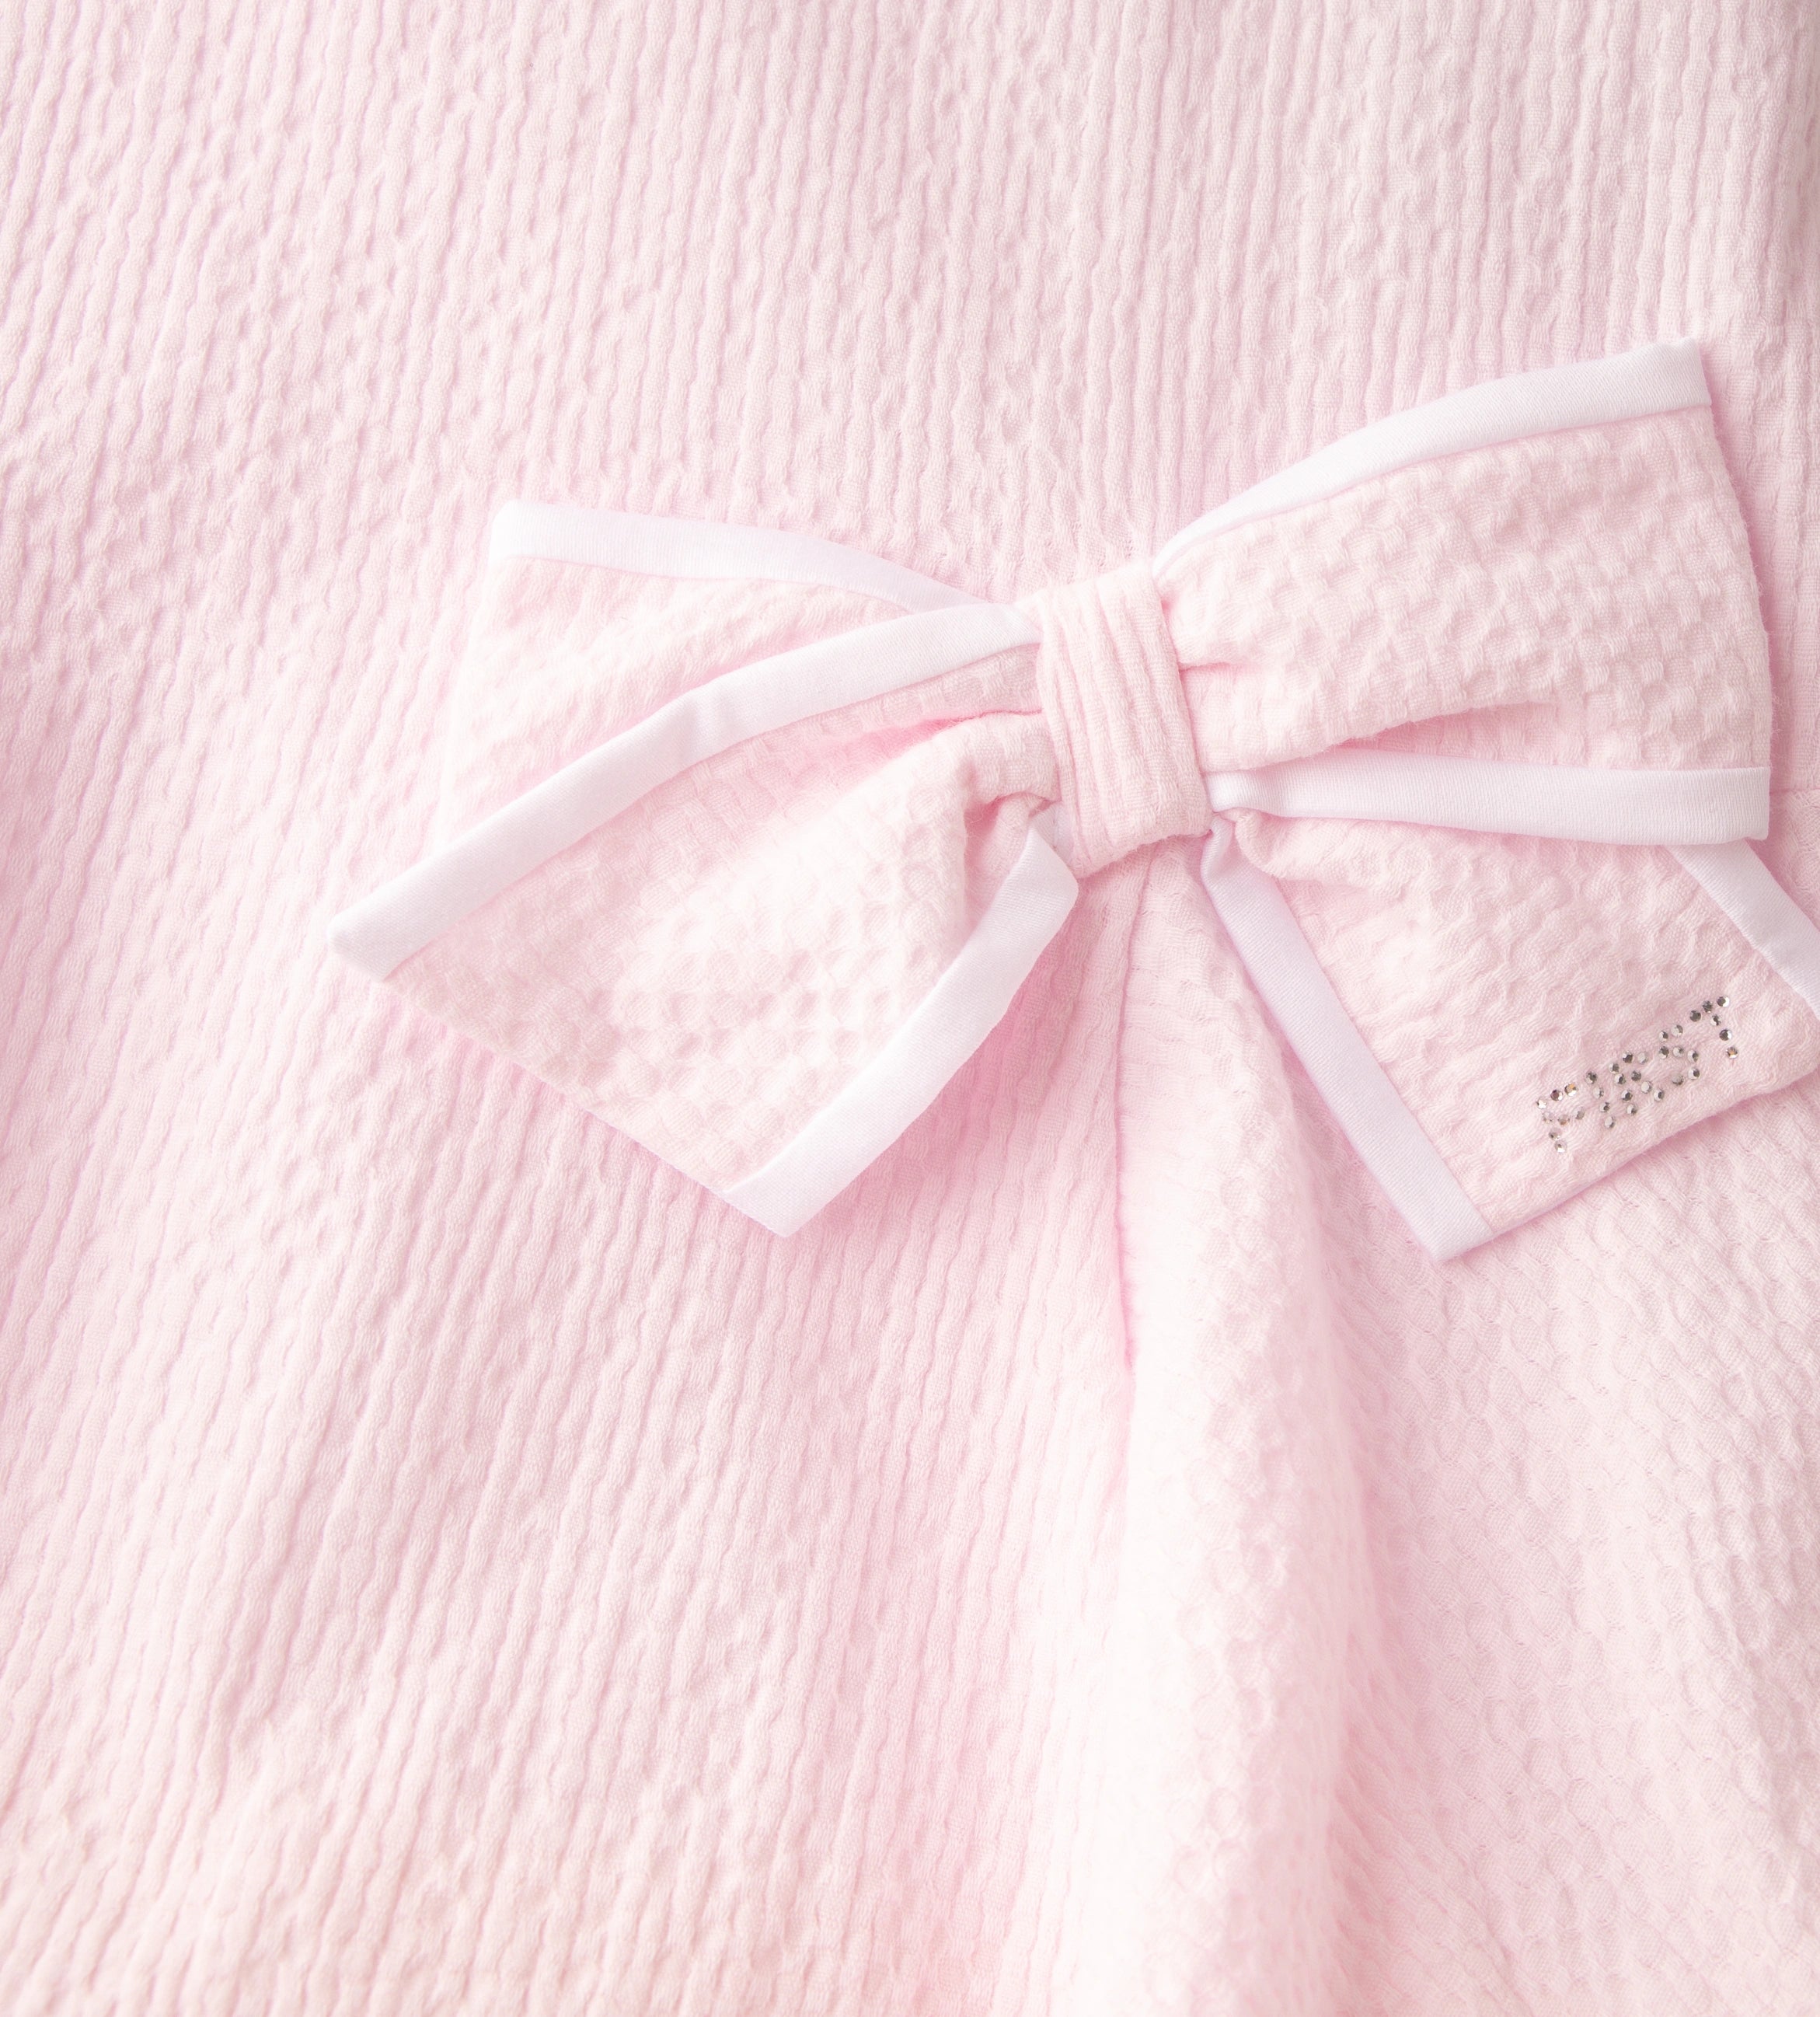 Dress with Bow Pink